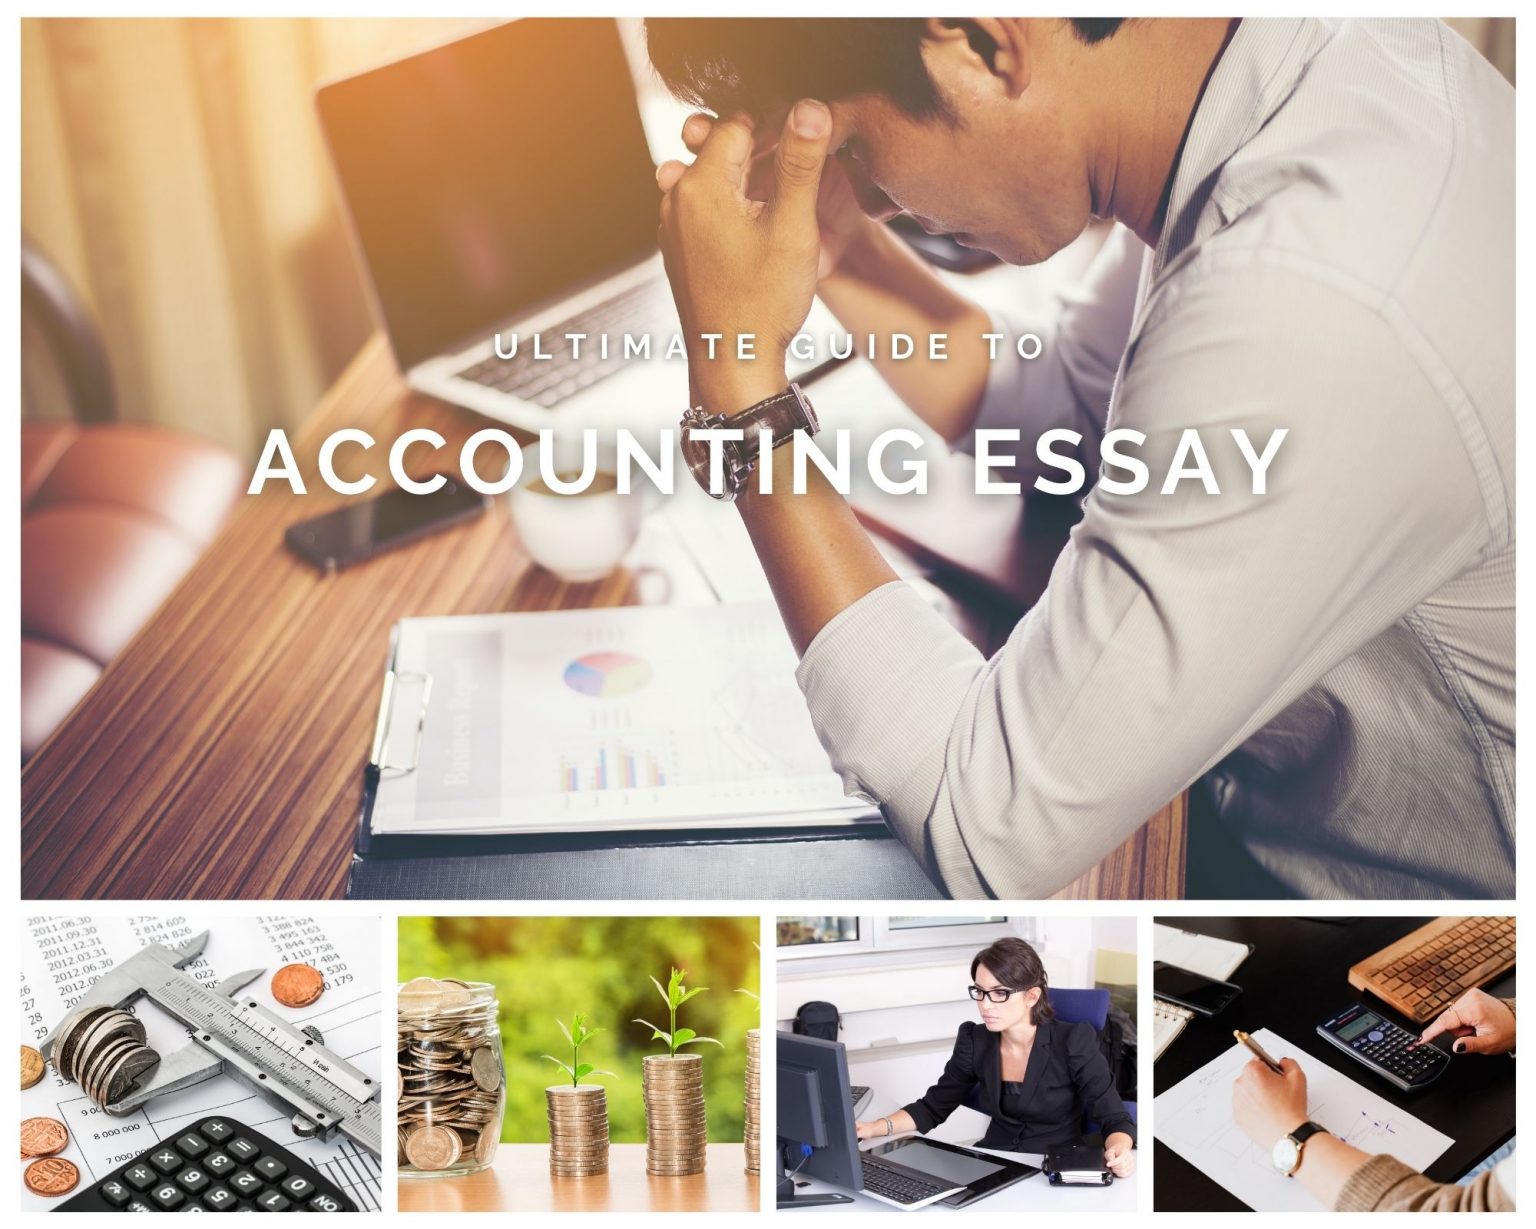 accounting as a profession essay